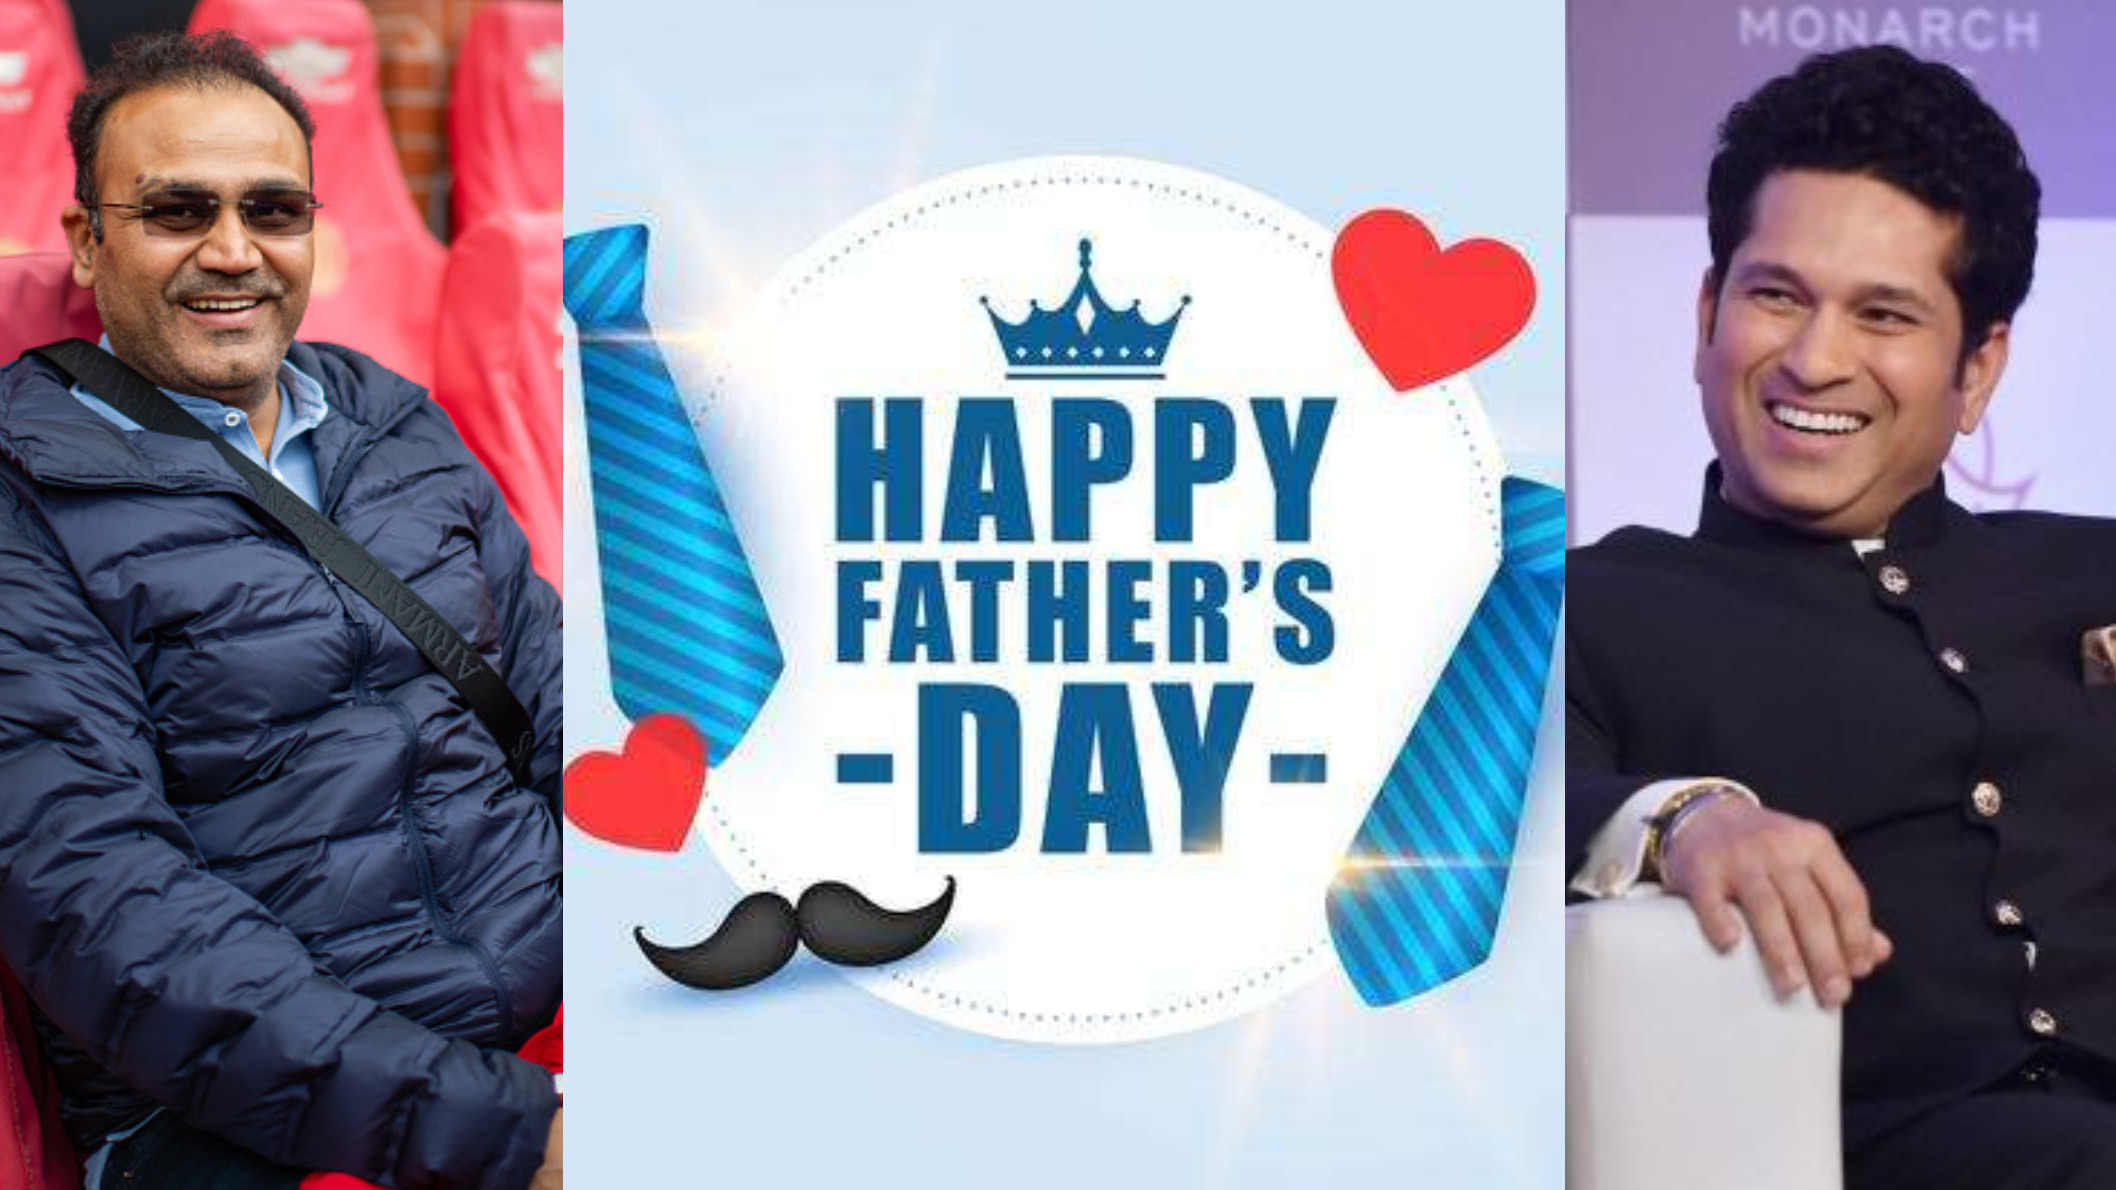 Indian cricket fraternity salute the spirit of Dads while celebrating International Father’s Day